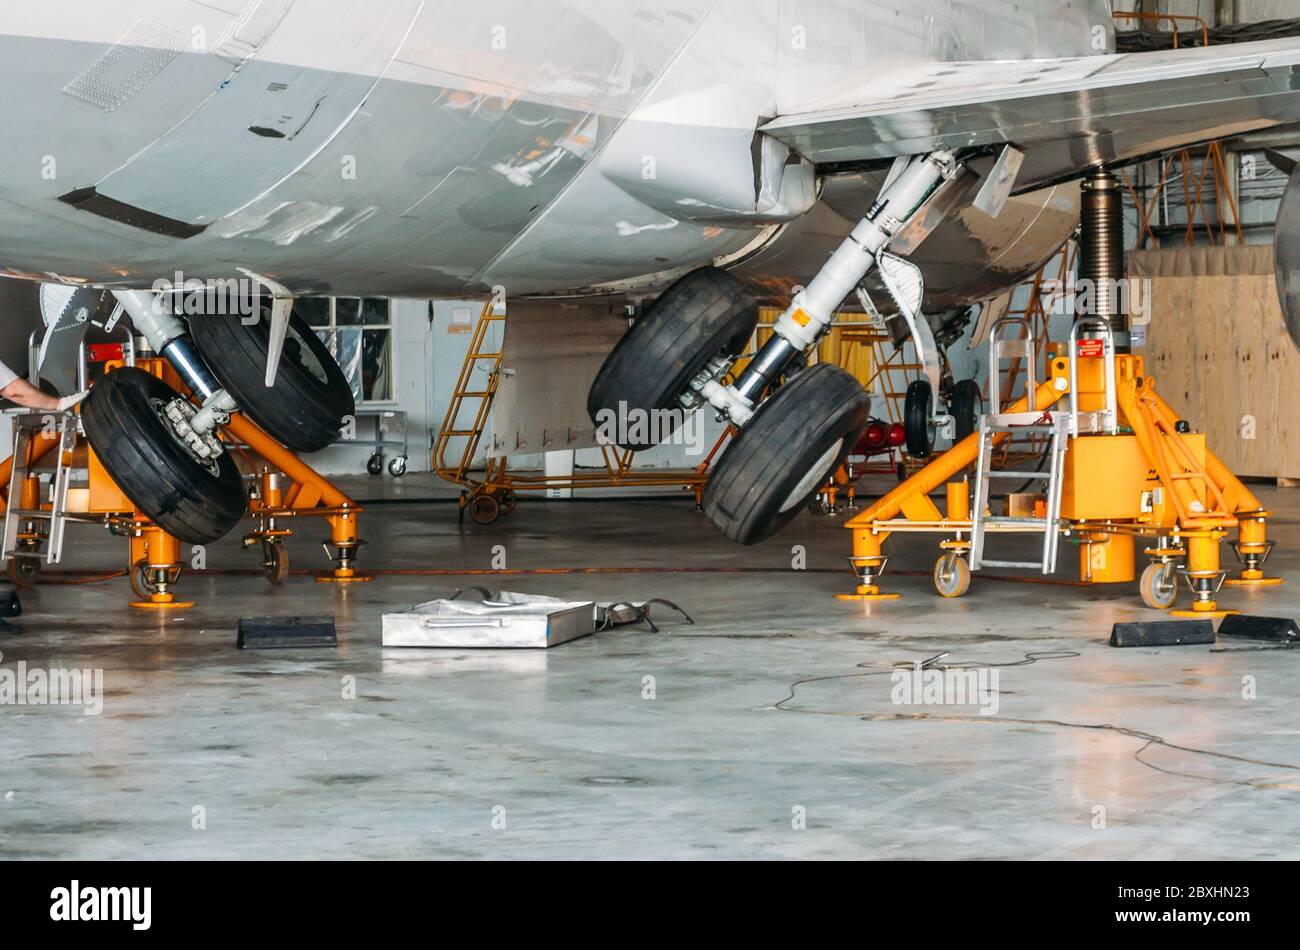 Gear up gear down chassis in the hangar after aircraft repair Stock Photo